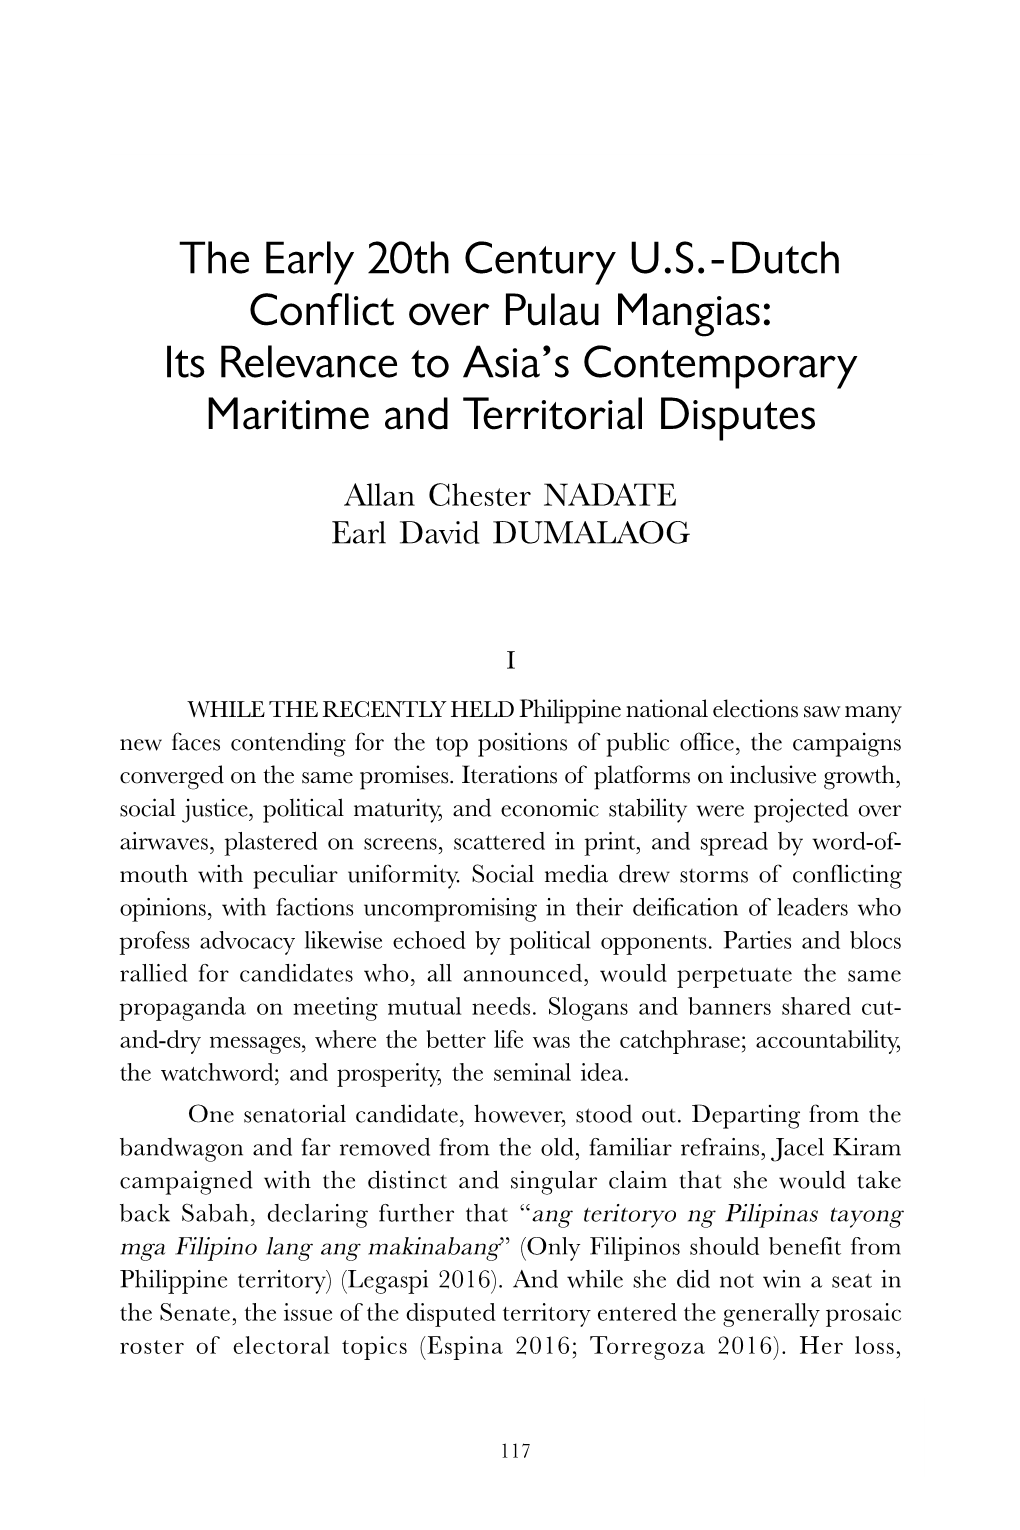 The Early 20Th-Century U.S.-Dutch Conflict Over Pulau Mangias: Its